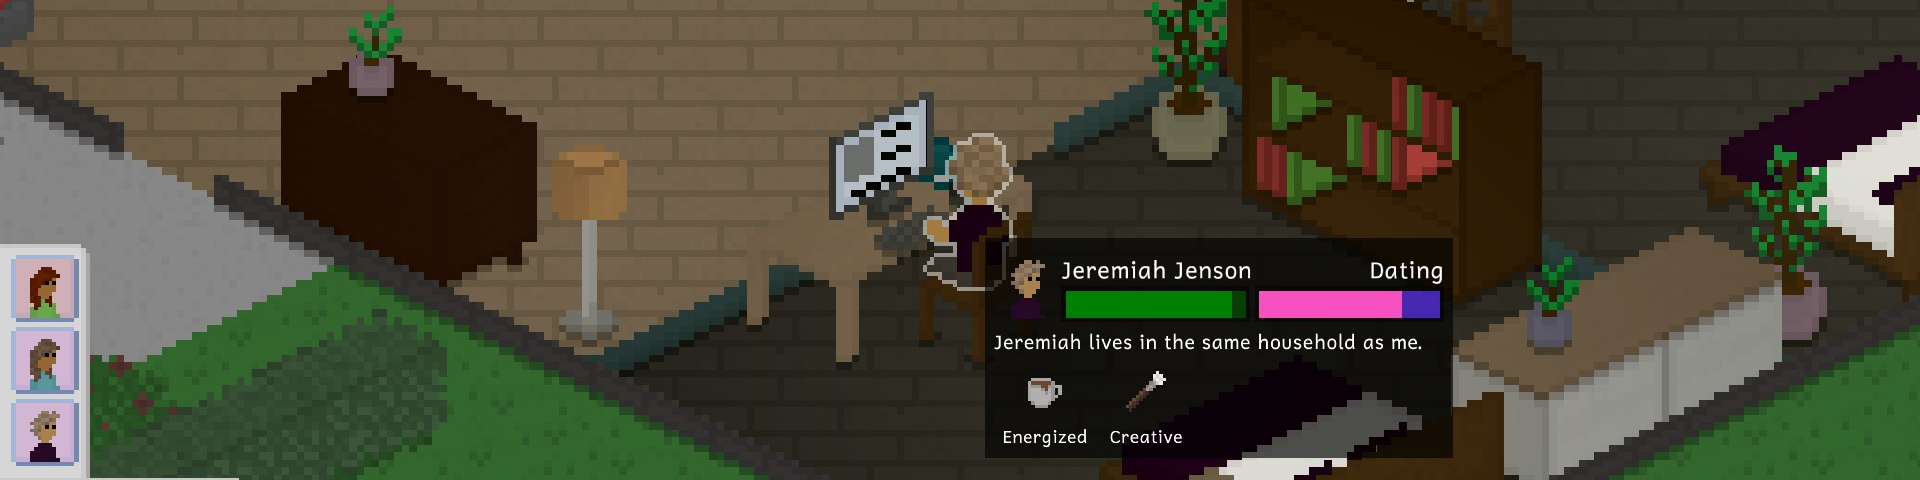 A banner showing a relationship tooltip for a Tiny called Jeremiah Jenson, whom the currently selected Tiny is dating